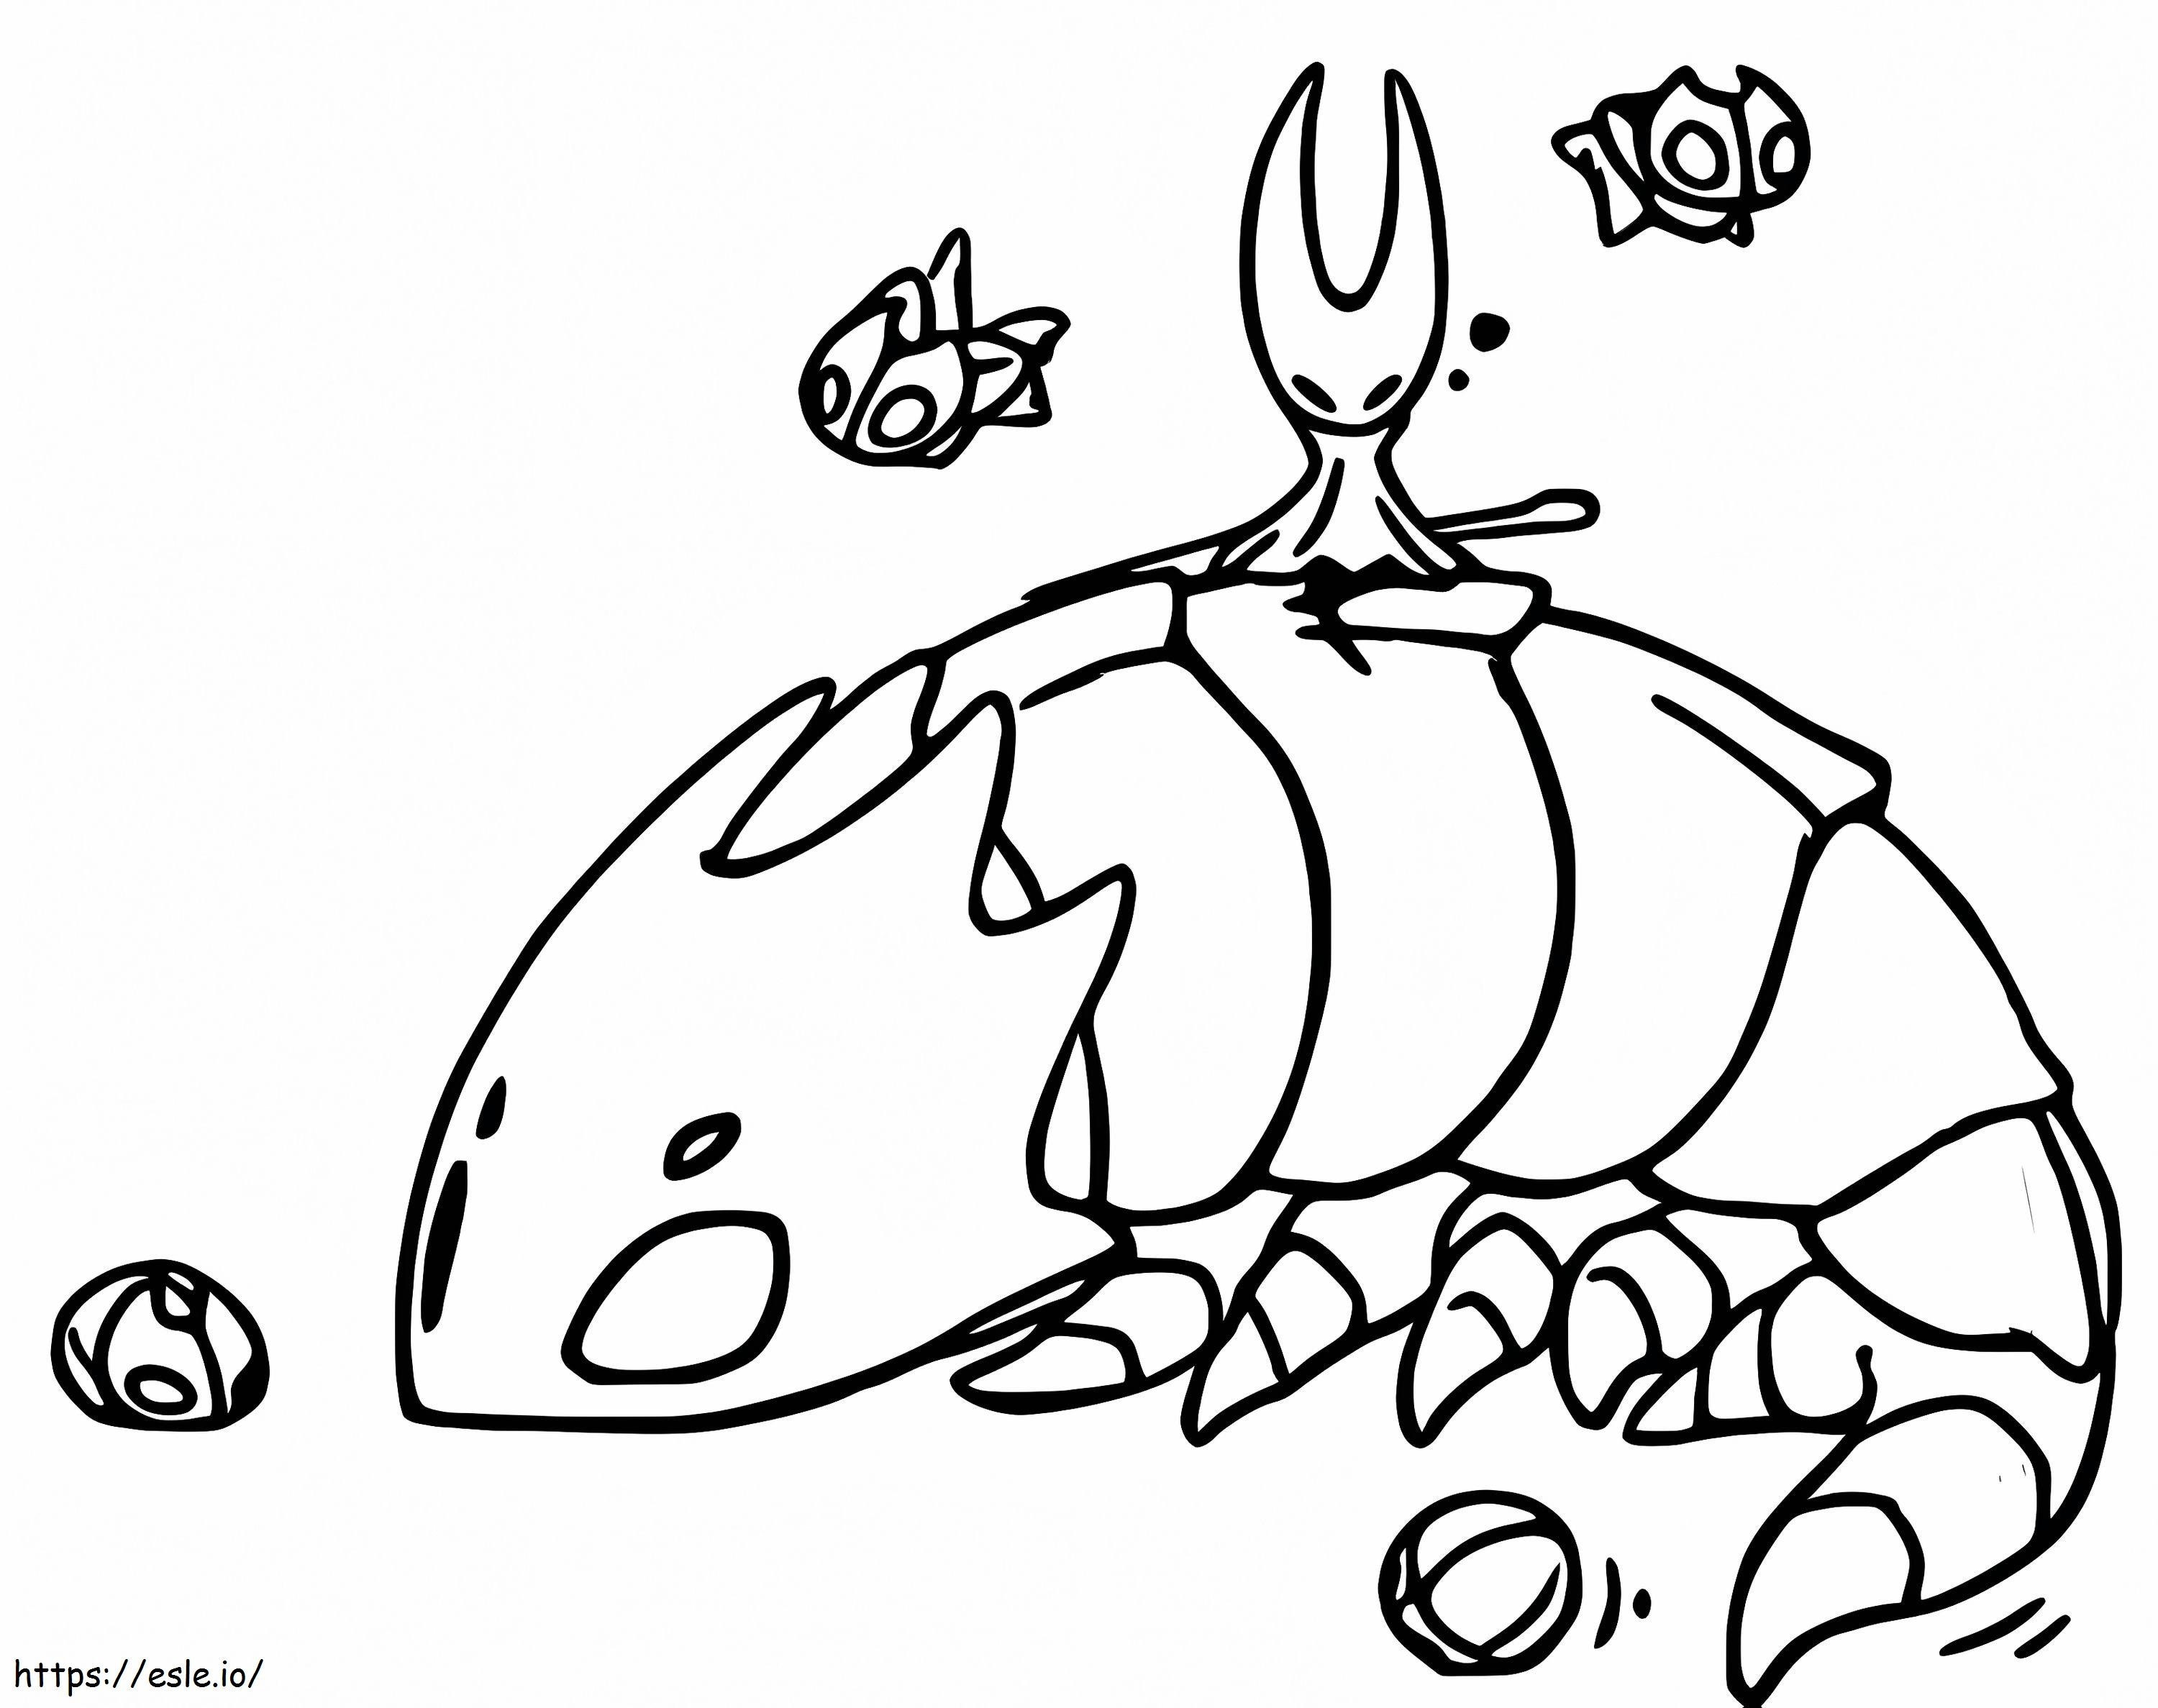 Printable Hollow Knight coloring page